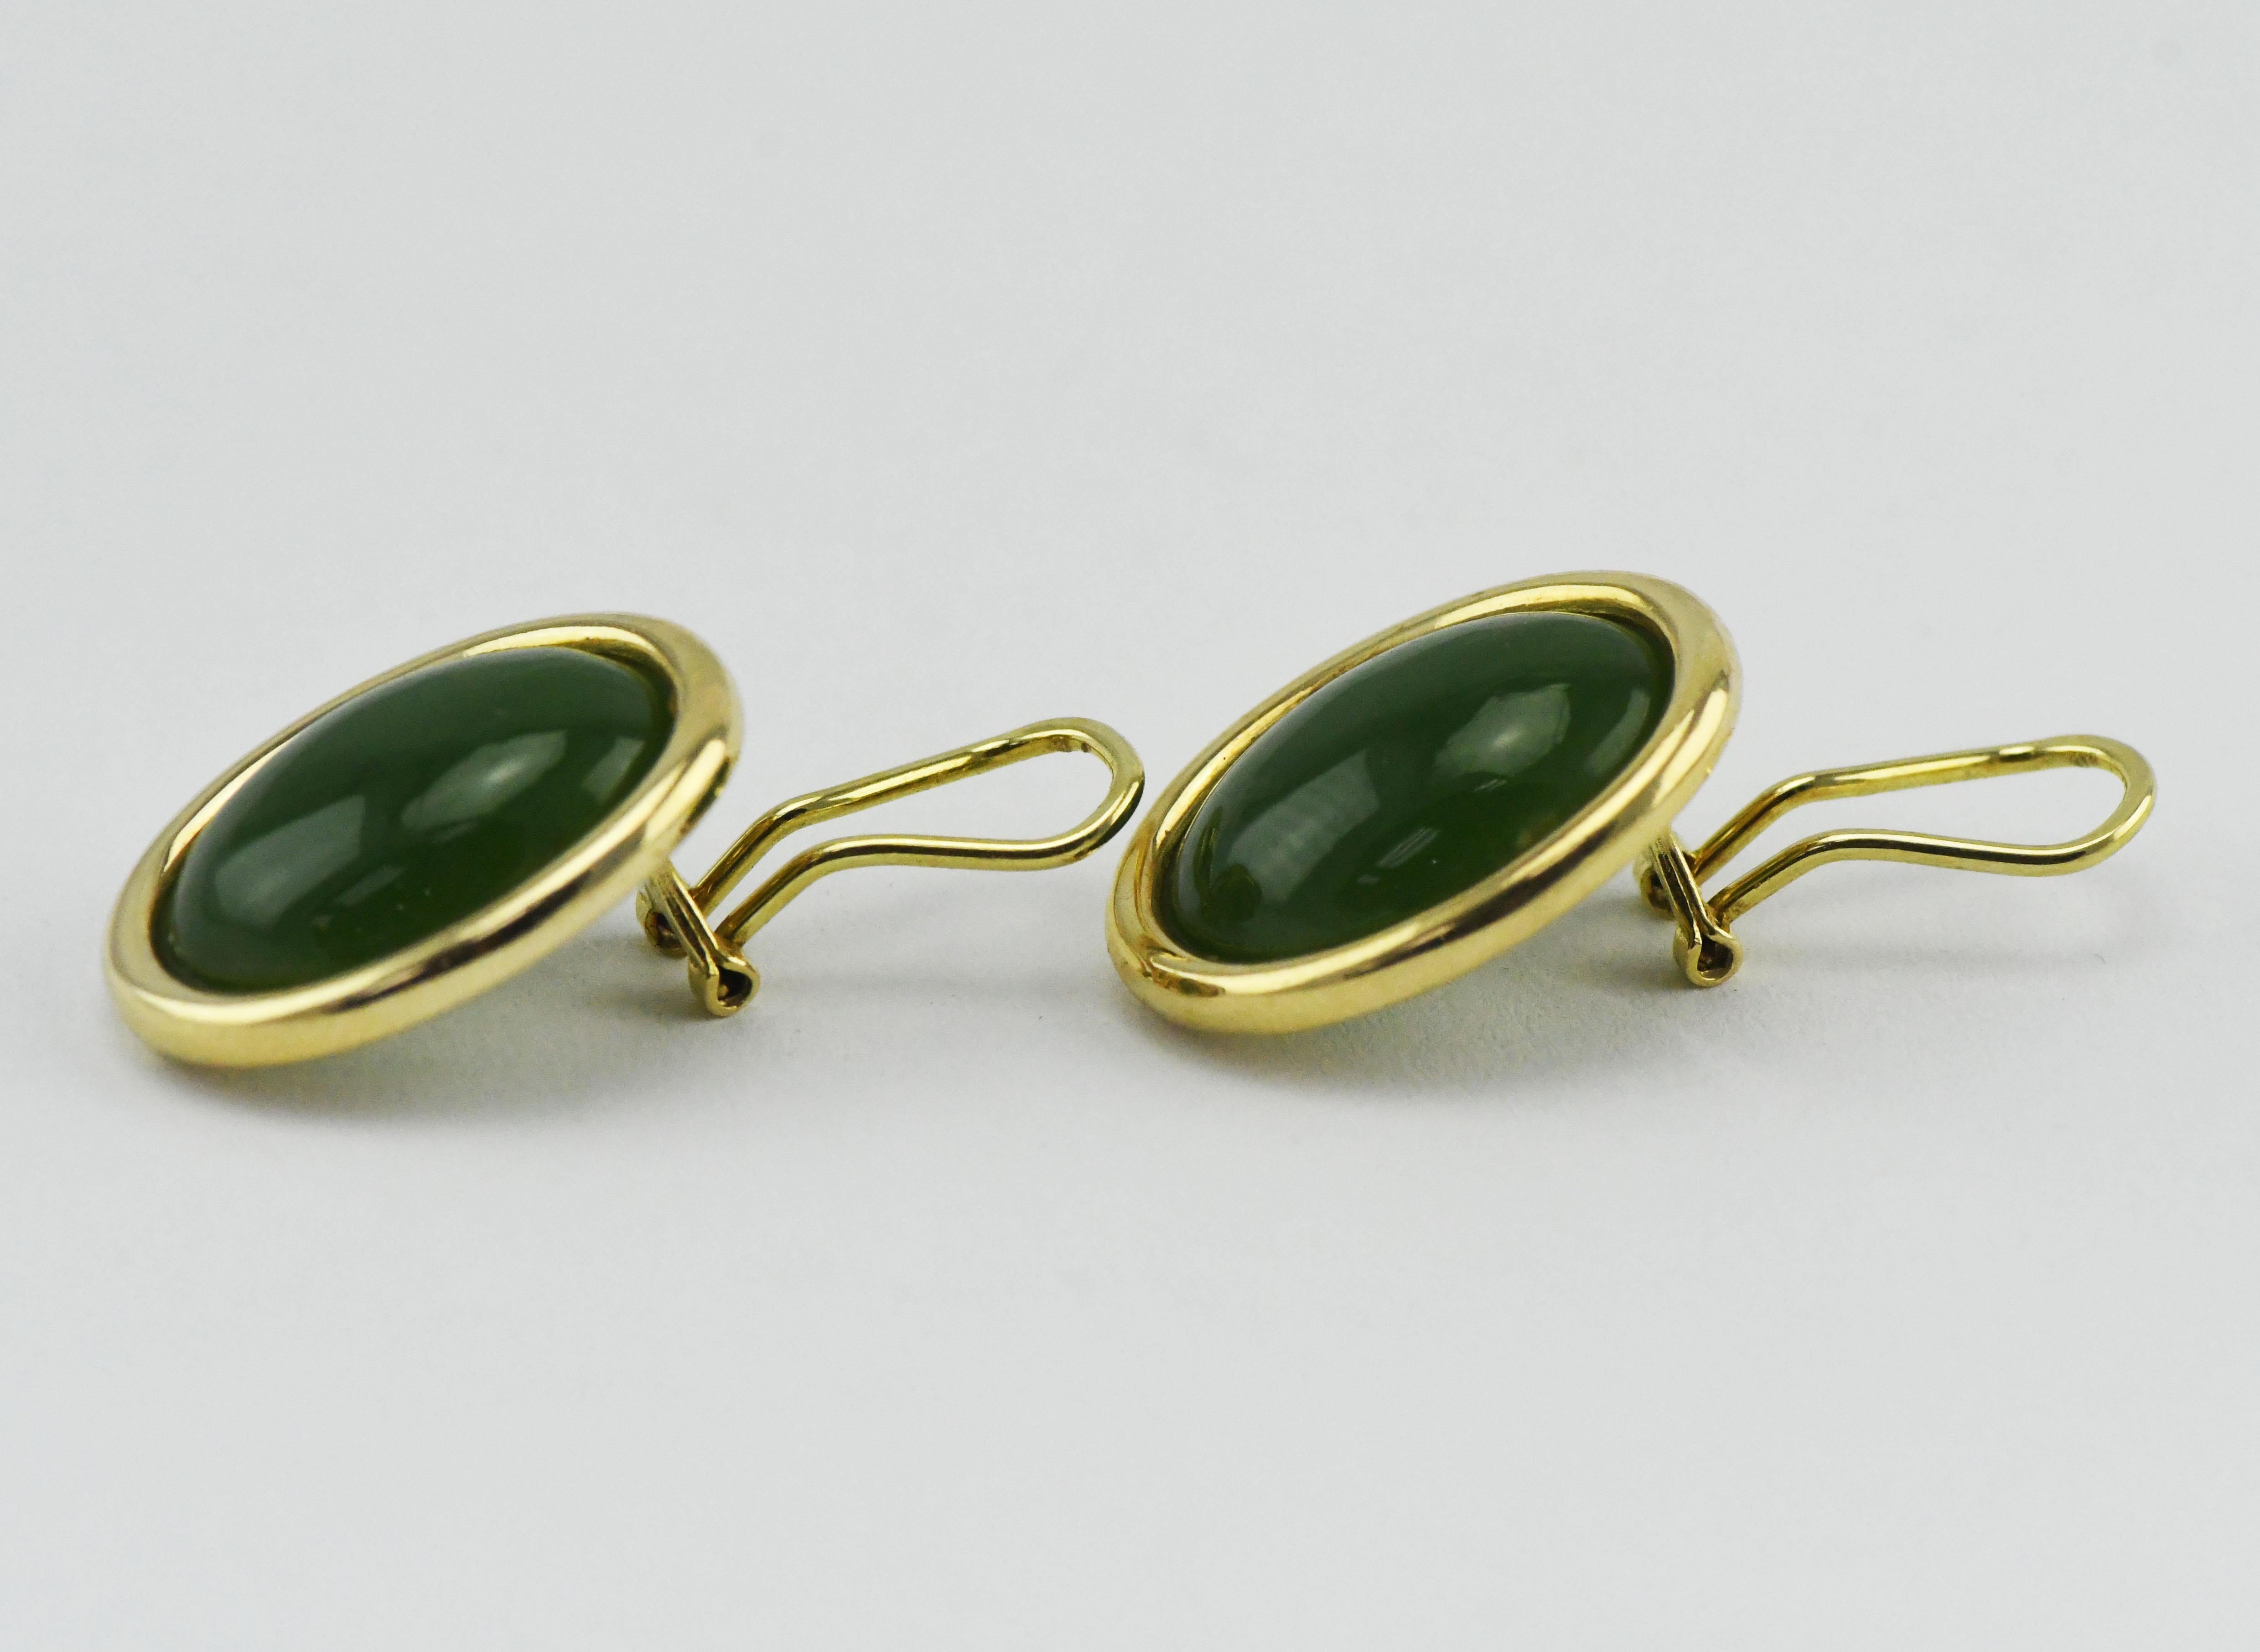 Women's Tse Sui Luen 14 Karat Gold Earrings with Cabochon Carved Jade with Omega Backs For Sale